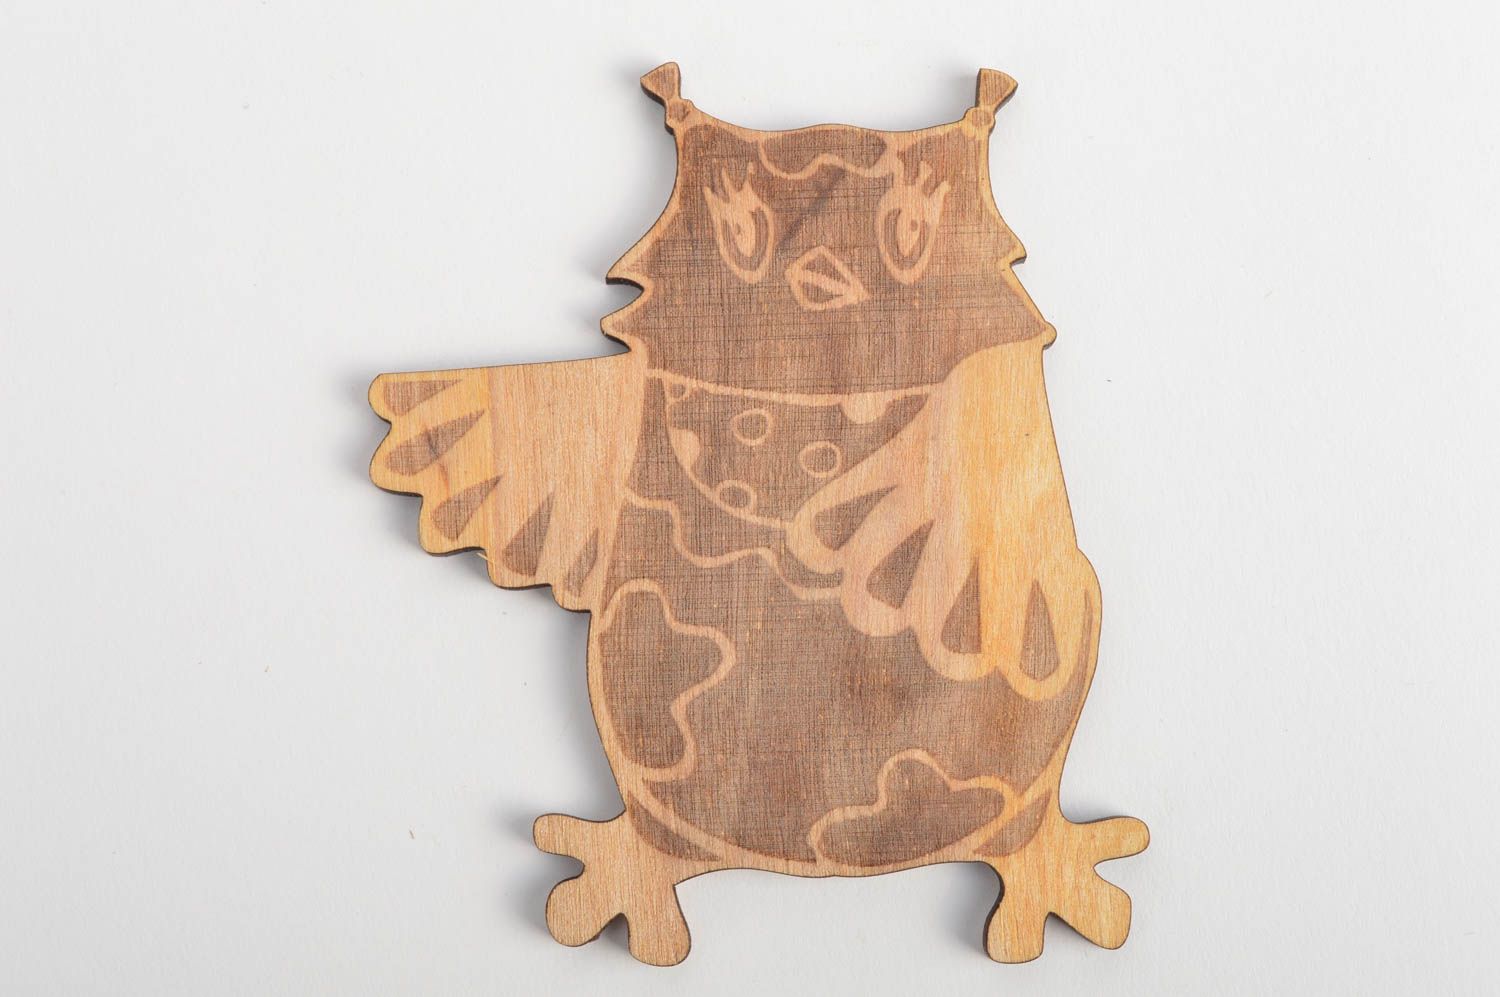 Blank for creativity in the form of an owl small beautiful handmade cut out photo 2